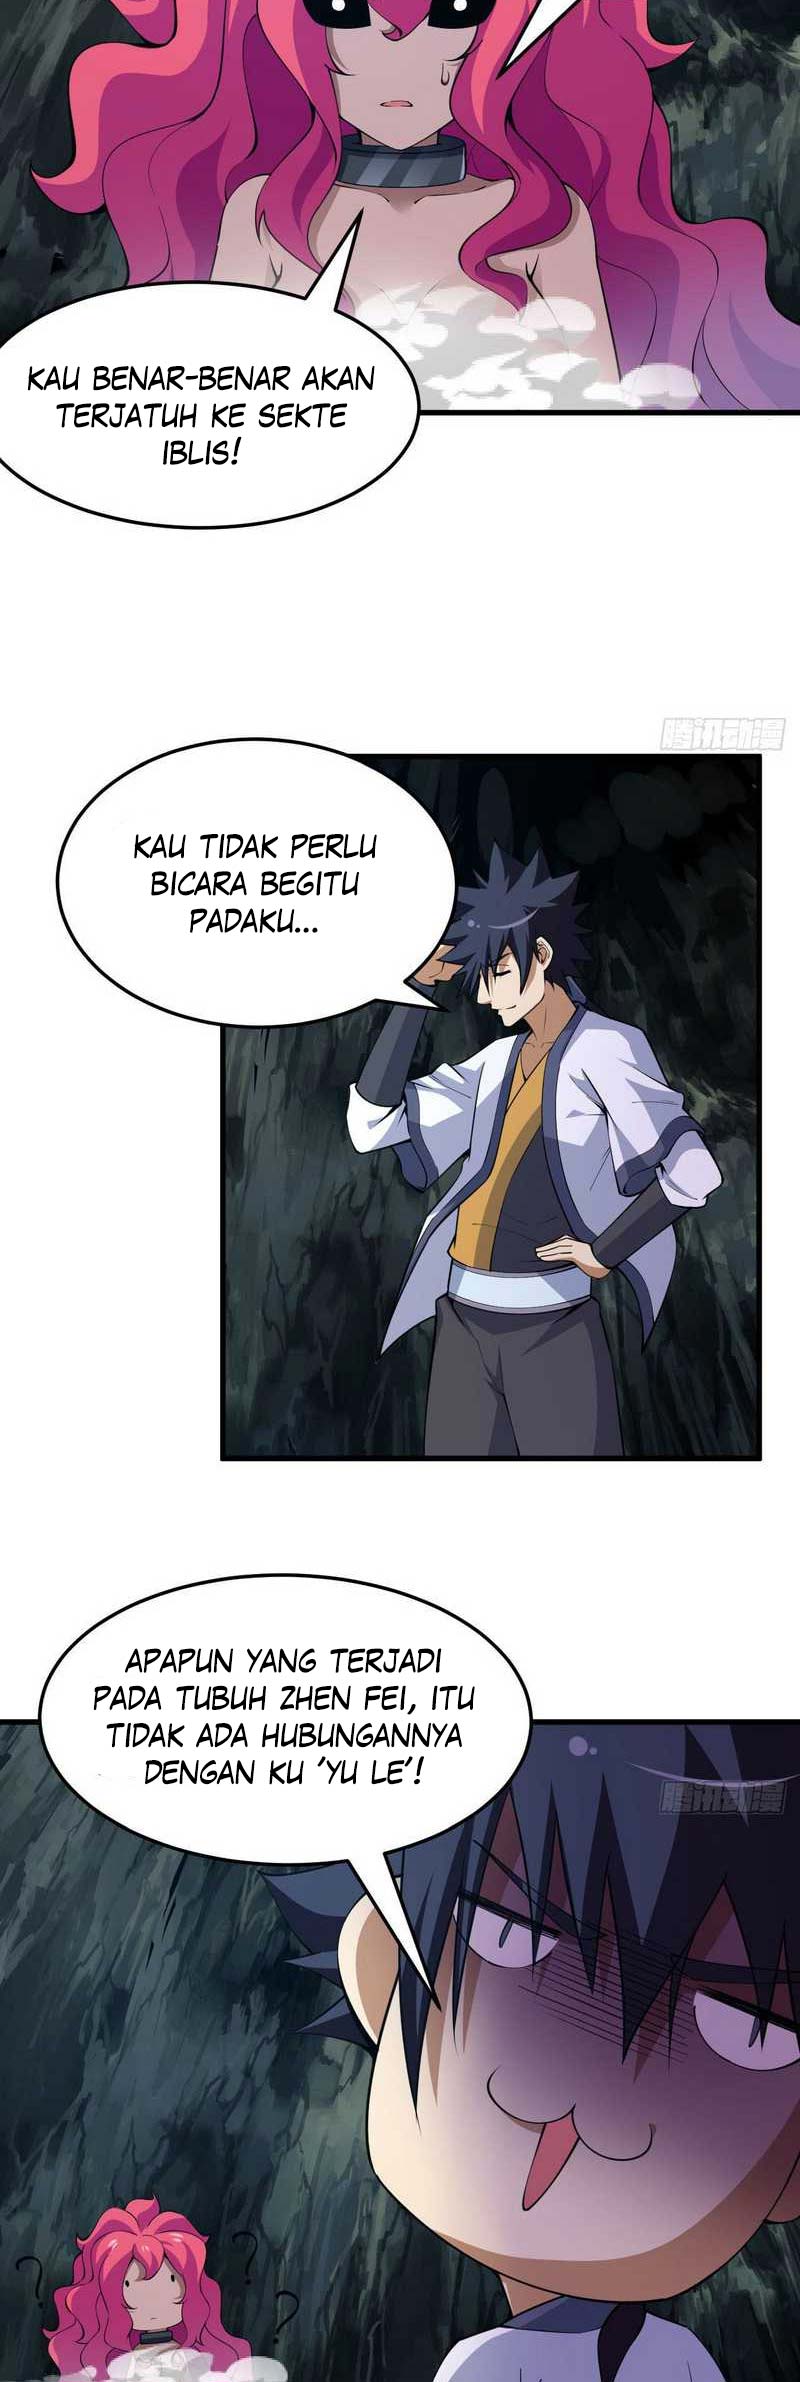 Dilarang COPAS - situs resmi www.mangacanblog.com - Komik i just want to be beaten to death by everyone 083 - chapter 83 84 Indonesia i just want to be beaten to death by everyone 083 - chapter 83 Terbaru 6|Baca Manga Komik Indonesia|Mangacan